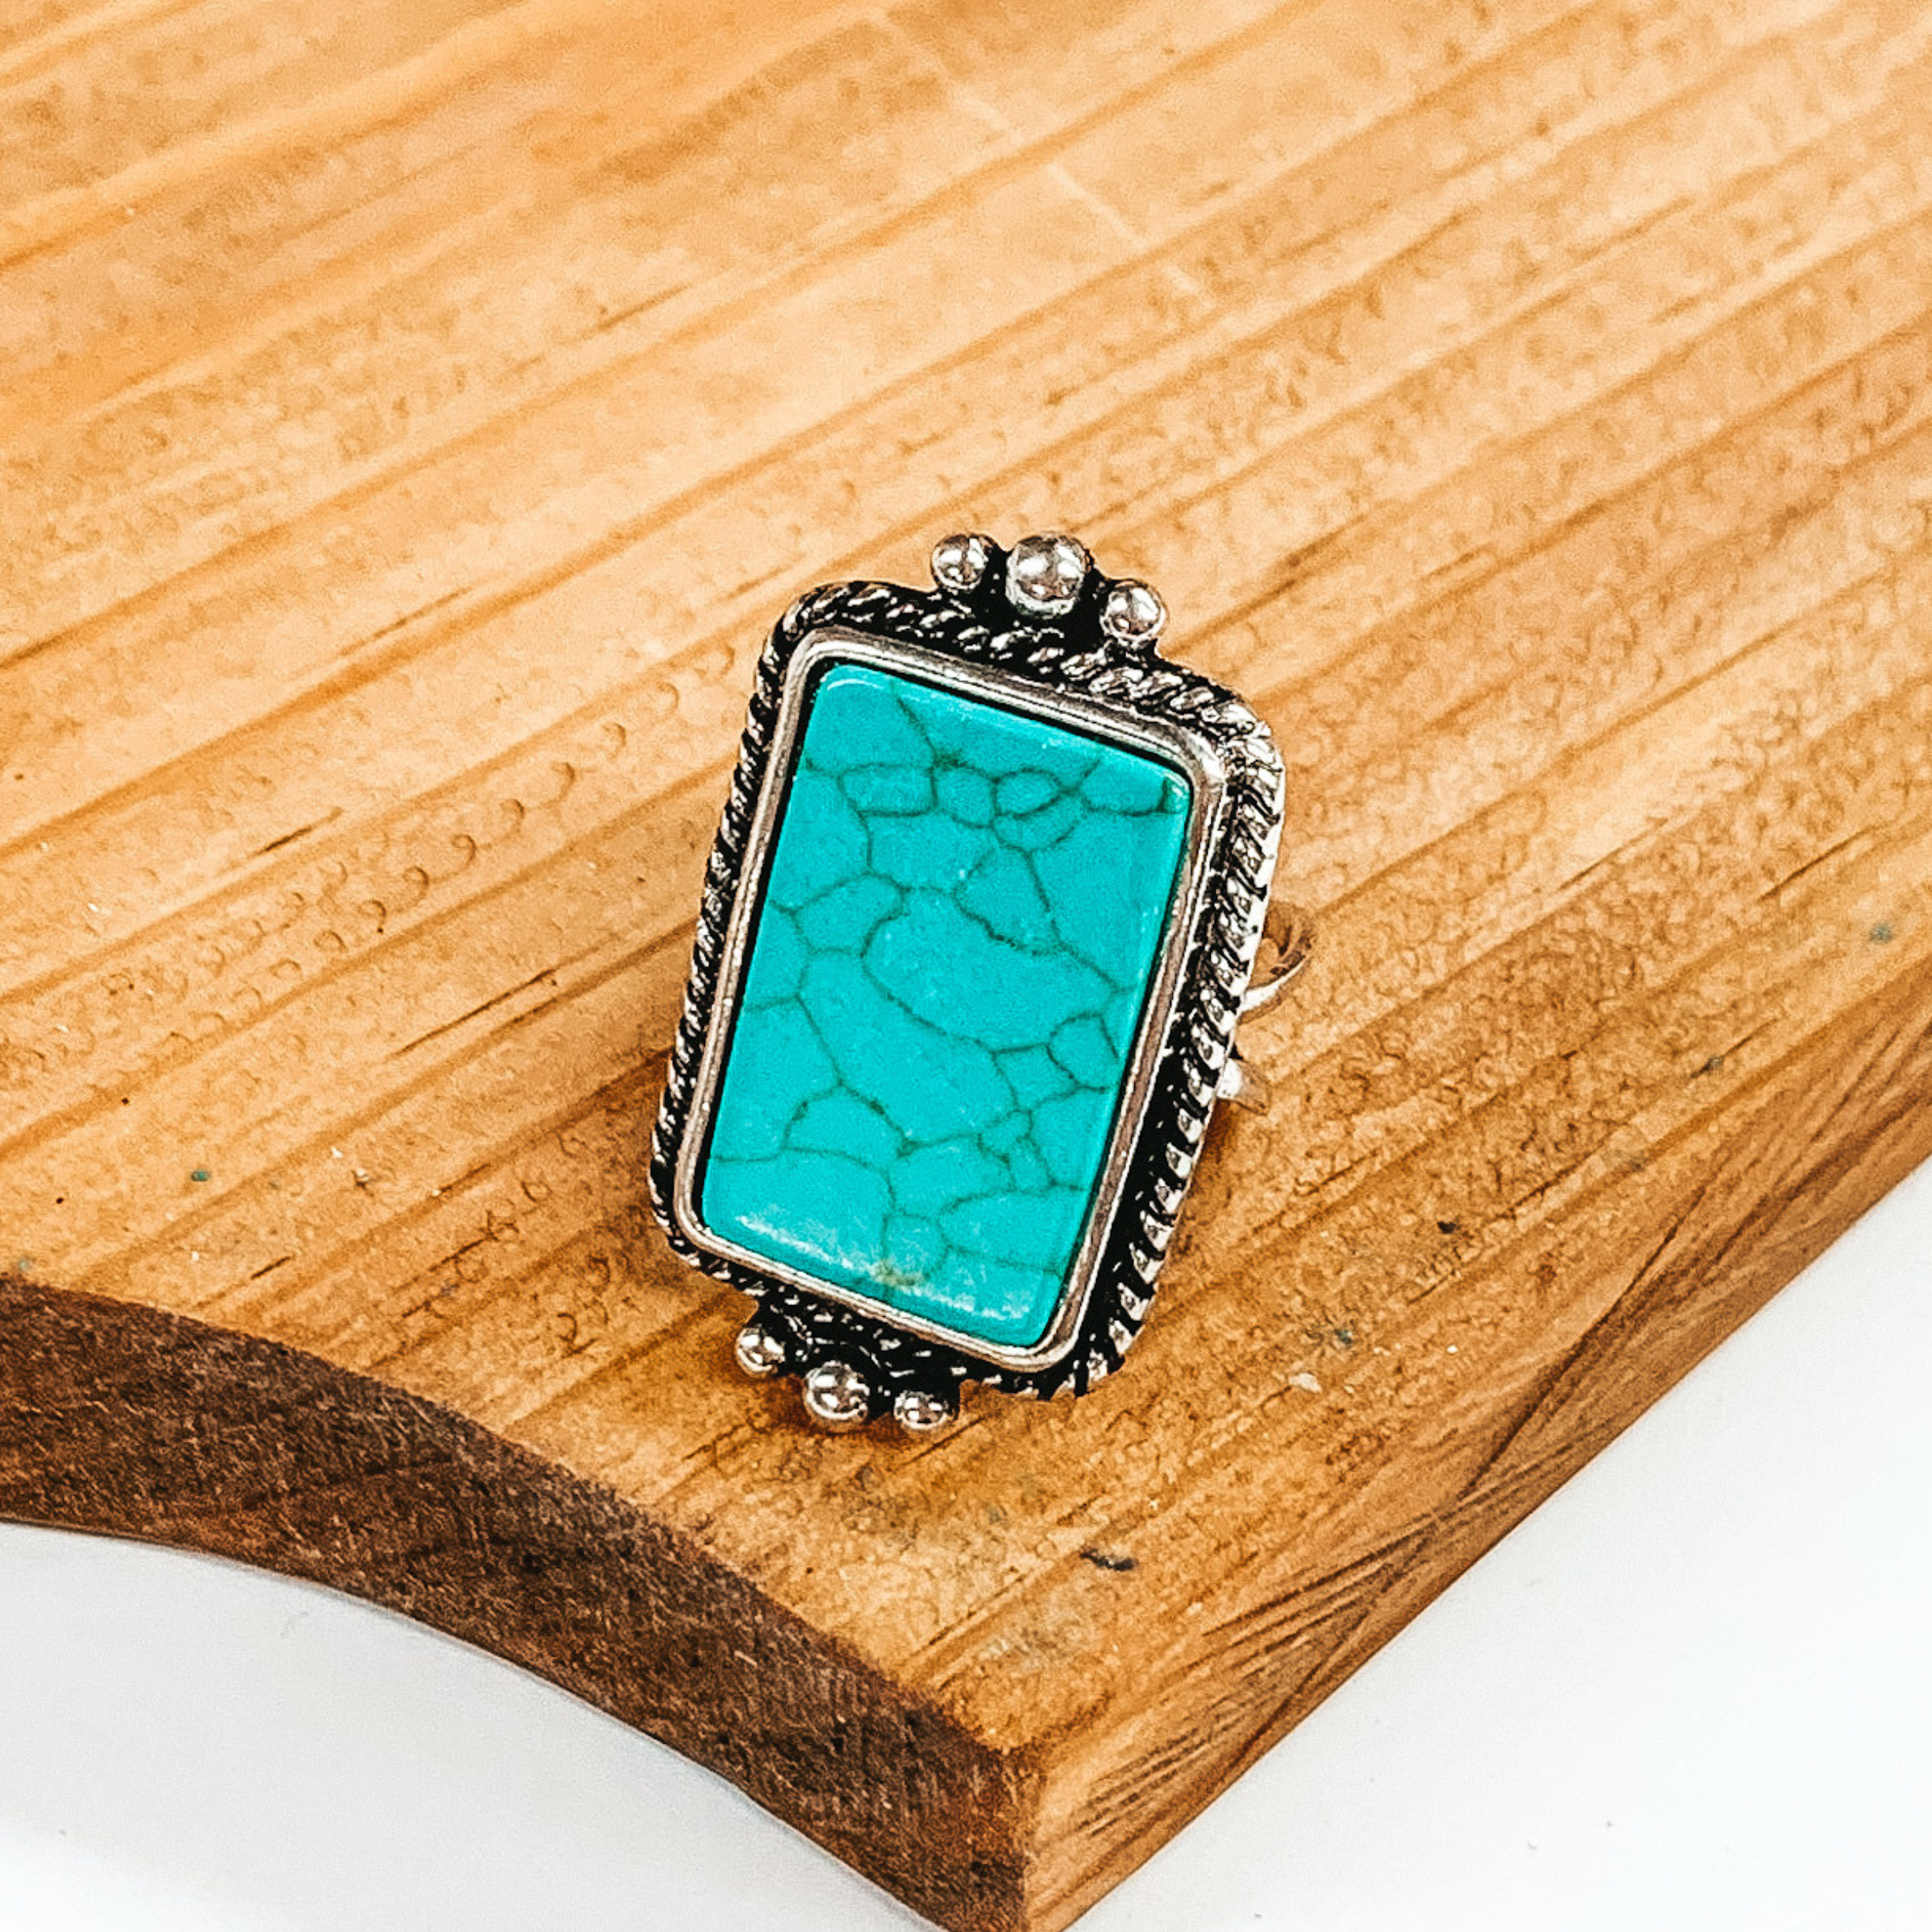  Silver cuff ring with reactangle, turquoise stone and silver detailed outline. This ring is pictured on a brown block on a white background. 